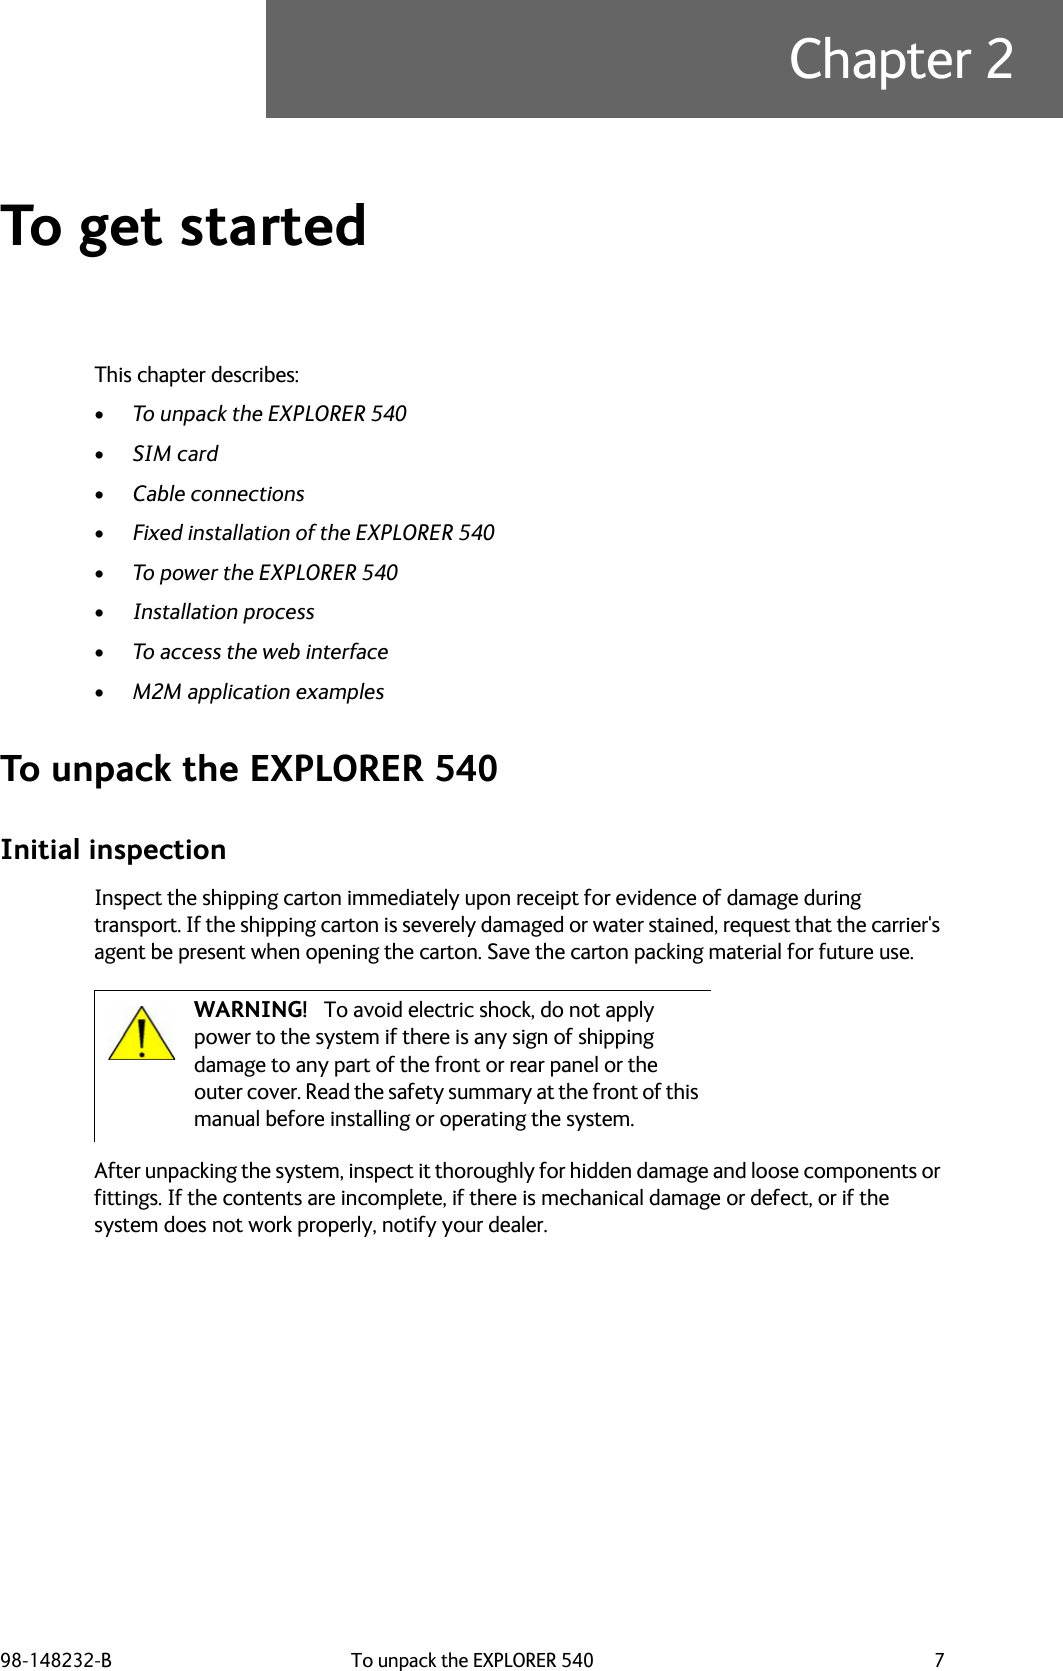 98-148232-B To unpack the EXPLORER 540 7Chapter 2To get started 2This chapter describes:•To unpack the EXPLORER 540•SIM card•Cable connections•Fixed installation of the EXPLORER 540•To power the EXPLORER 540•Installation process•To access the web interface•M2M application examplesTo unpack the EXPLORER 540Initial inspectionInspect the shipping carton immediately upon receipt for evidence of damage during transport. If the shipping carton is severely damaged or water stained, request that the carrier&apos;s agent be present when opening the carton. Save the carton packing material for future use.After unpacking the system, inspect it thoroughly for hidden damage and loose components or fittings. If the contents are incomplete, if there is mechanical damage or defect, or if the system does not work properly, notify your dealer. WARNING! To avoid electric shock, do not apply power to the system if there is any sign of shipping damage to any part of the front or rear panel or the outer cover. Read the safety summary at the front of this manual before installing or operating the system.